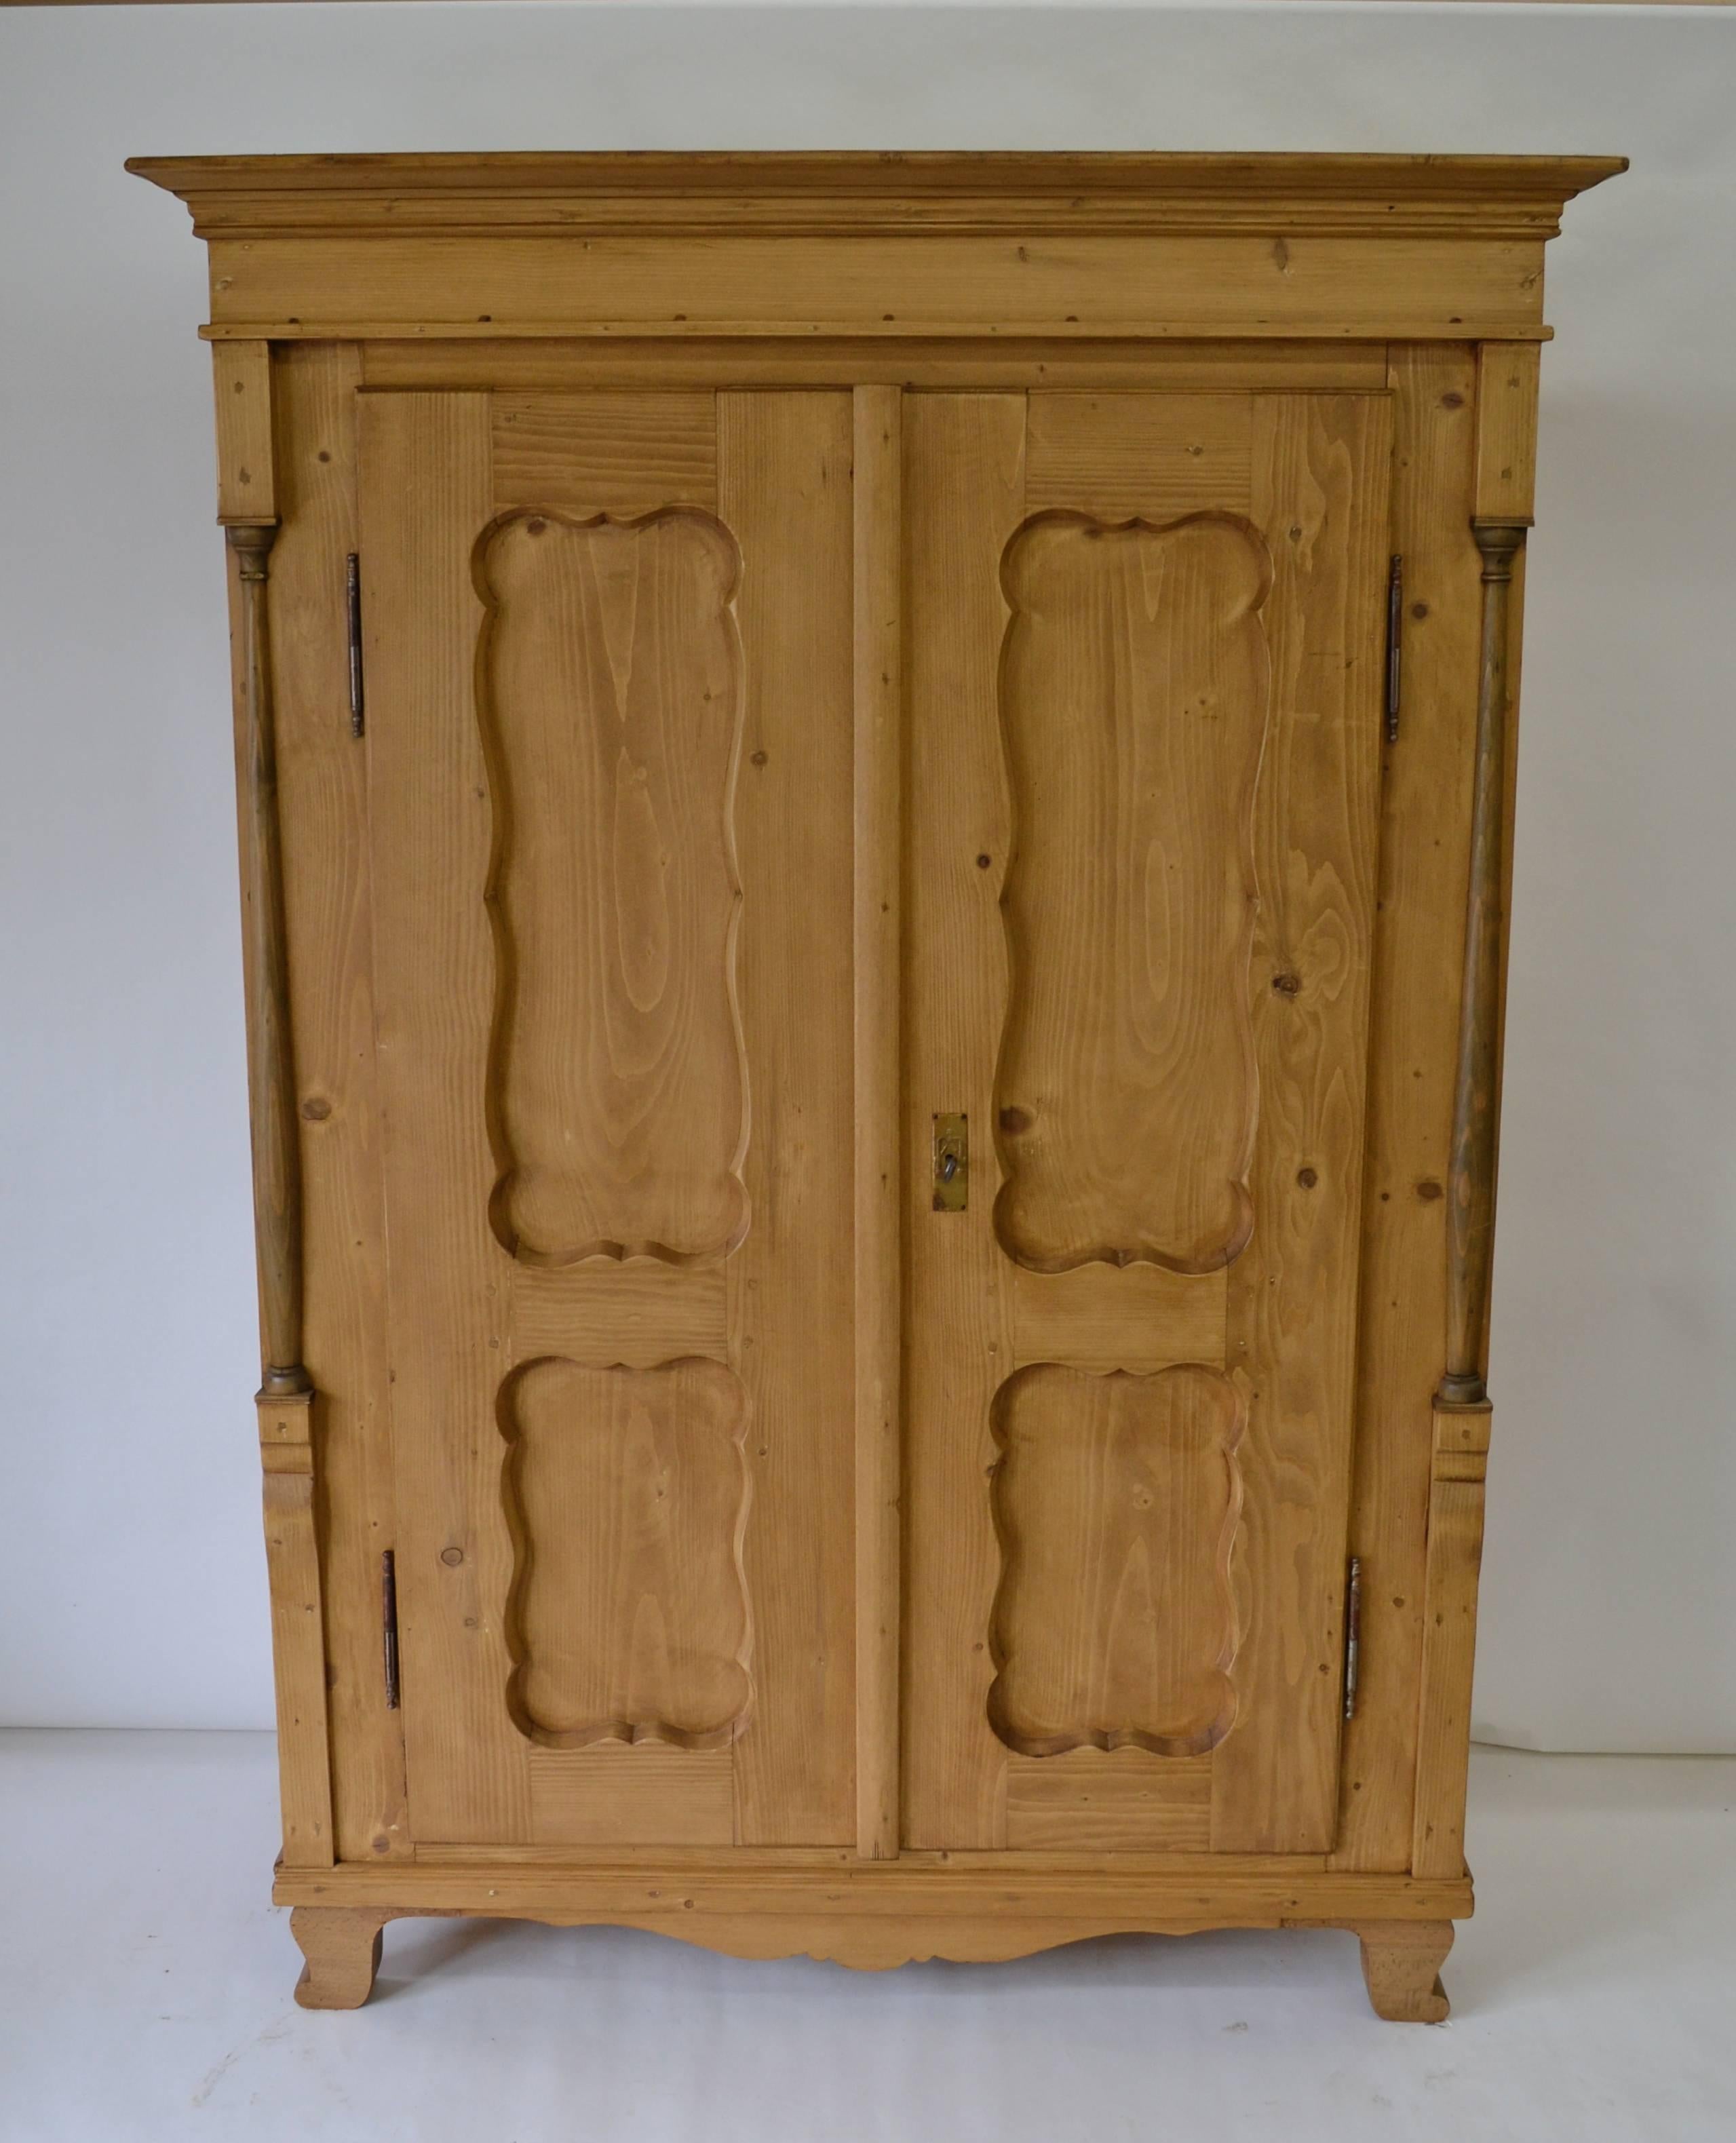 This is a small two-door pine armoire of exceptional quality, superb condition and unusual design. Constructed of stock one inch thick, this sturdy piece features eight scalloped panels in the doors and sides. The doors open almost 180 degrees on